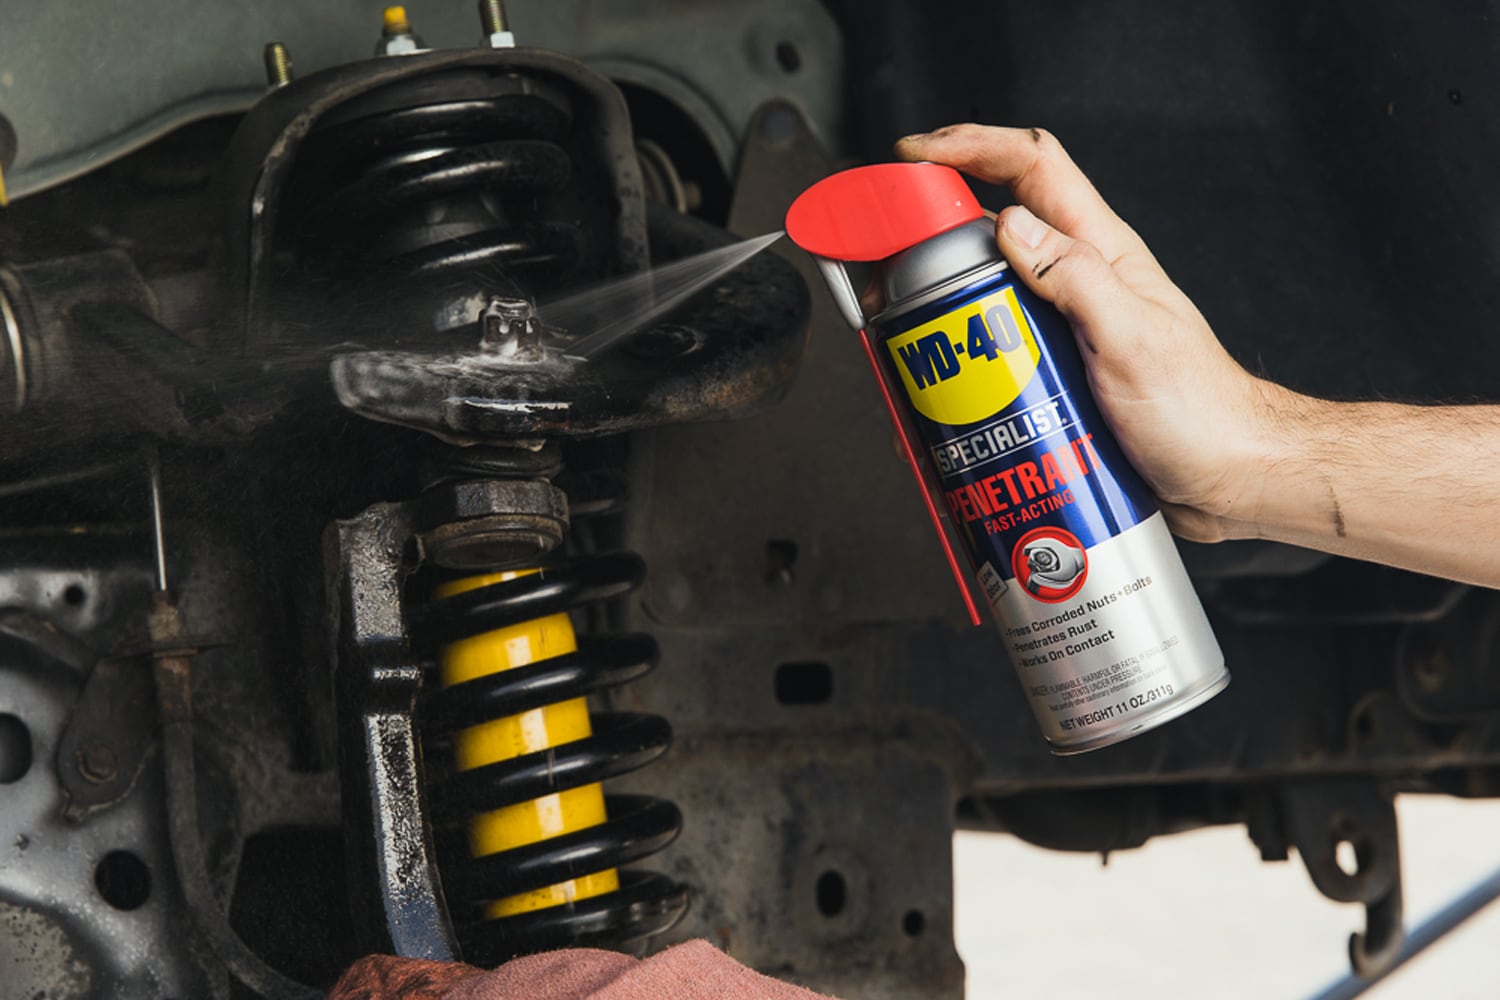 WD-40® Specialist® Contact Cleaner - Case of (6) 11 oz Cans